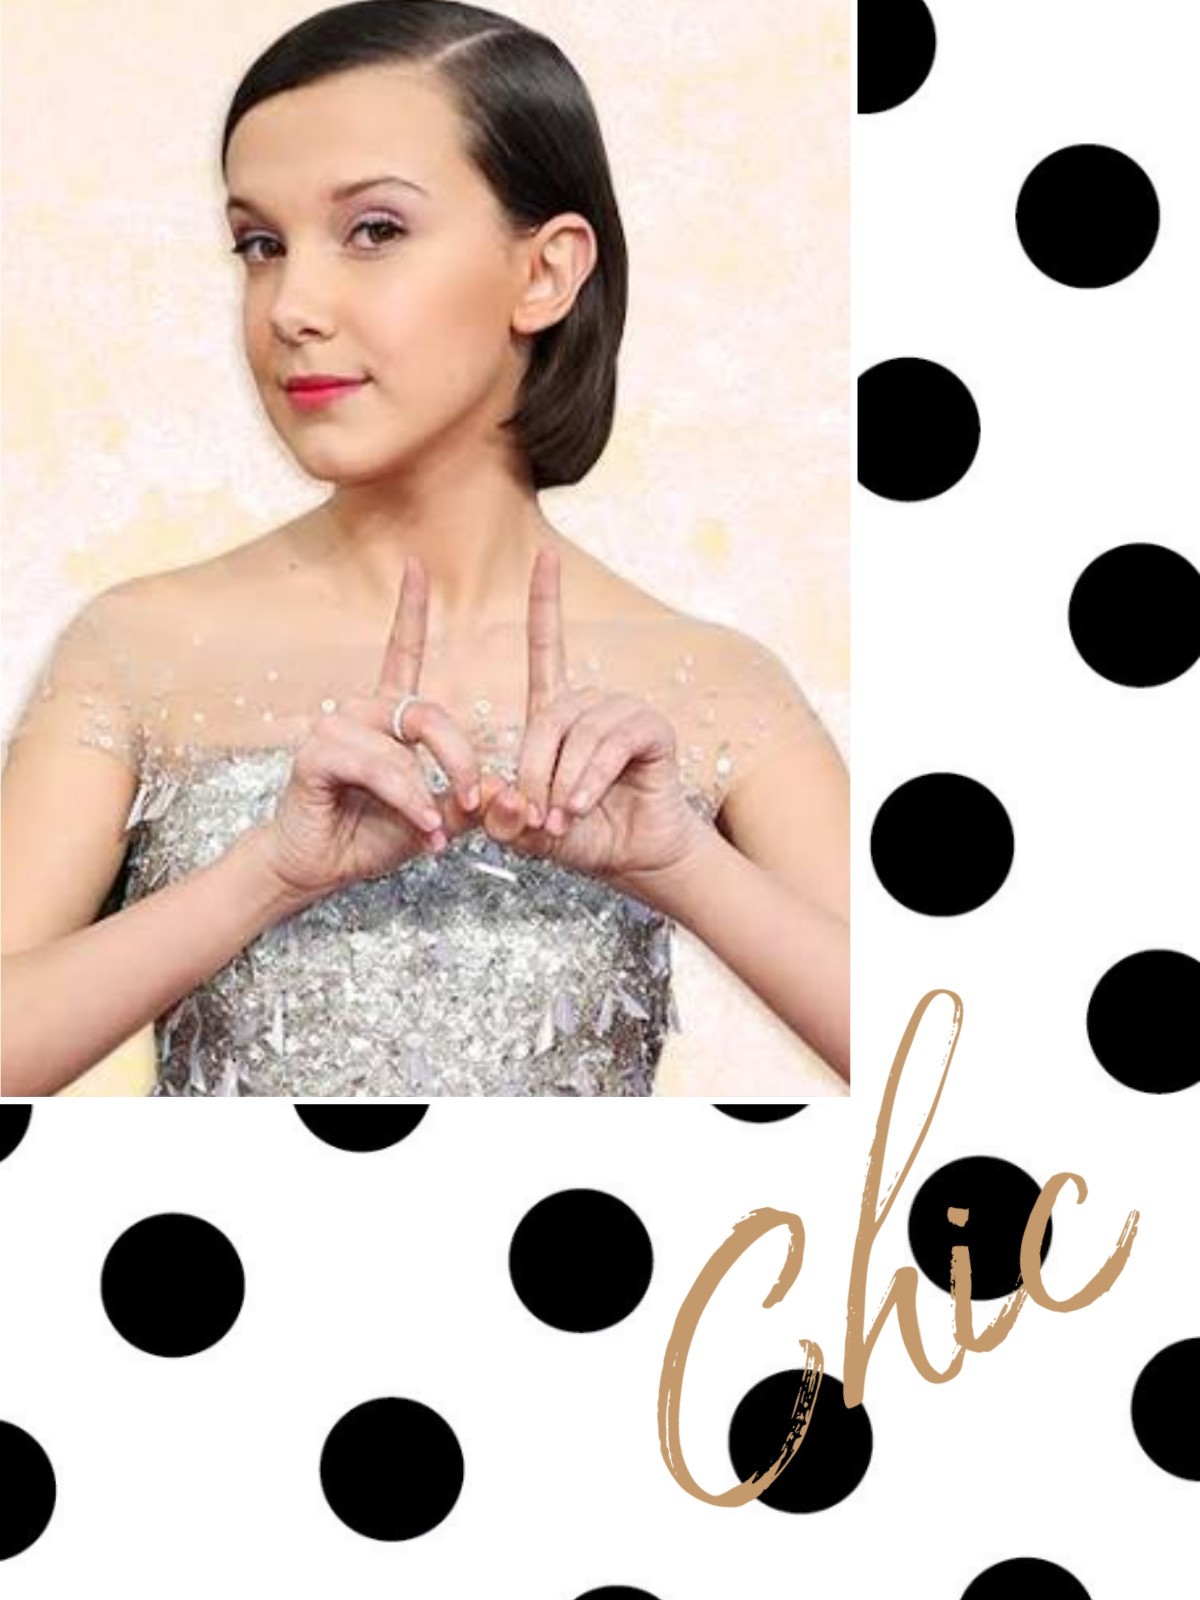 Millie bobby brown, if u see this, please email me at @jenhollow44@gmail.com 